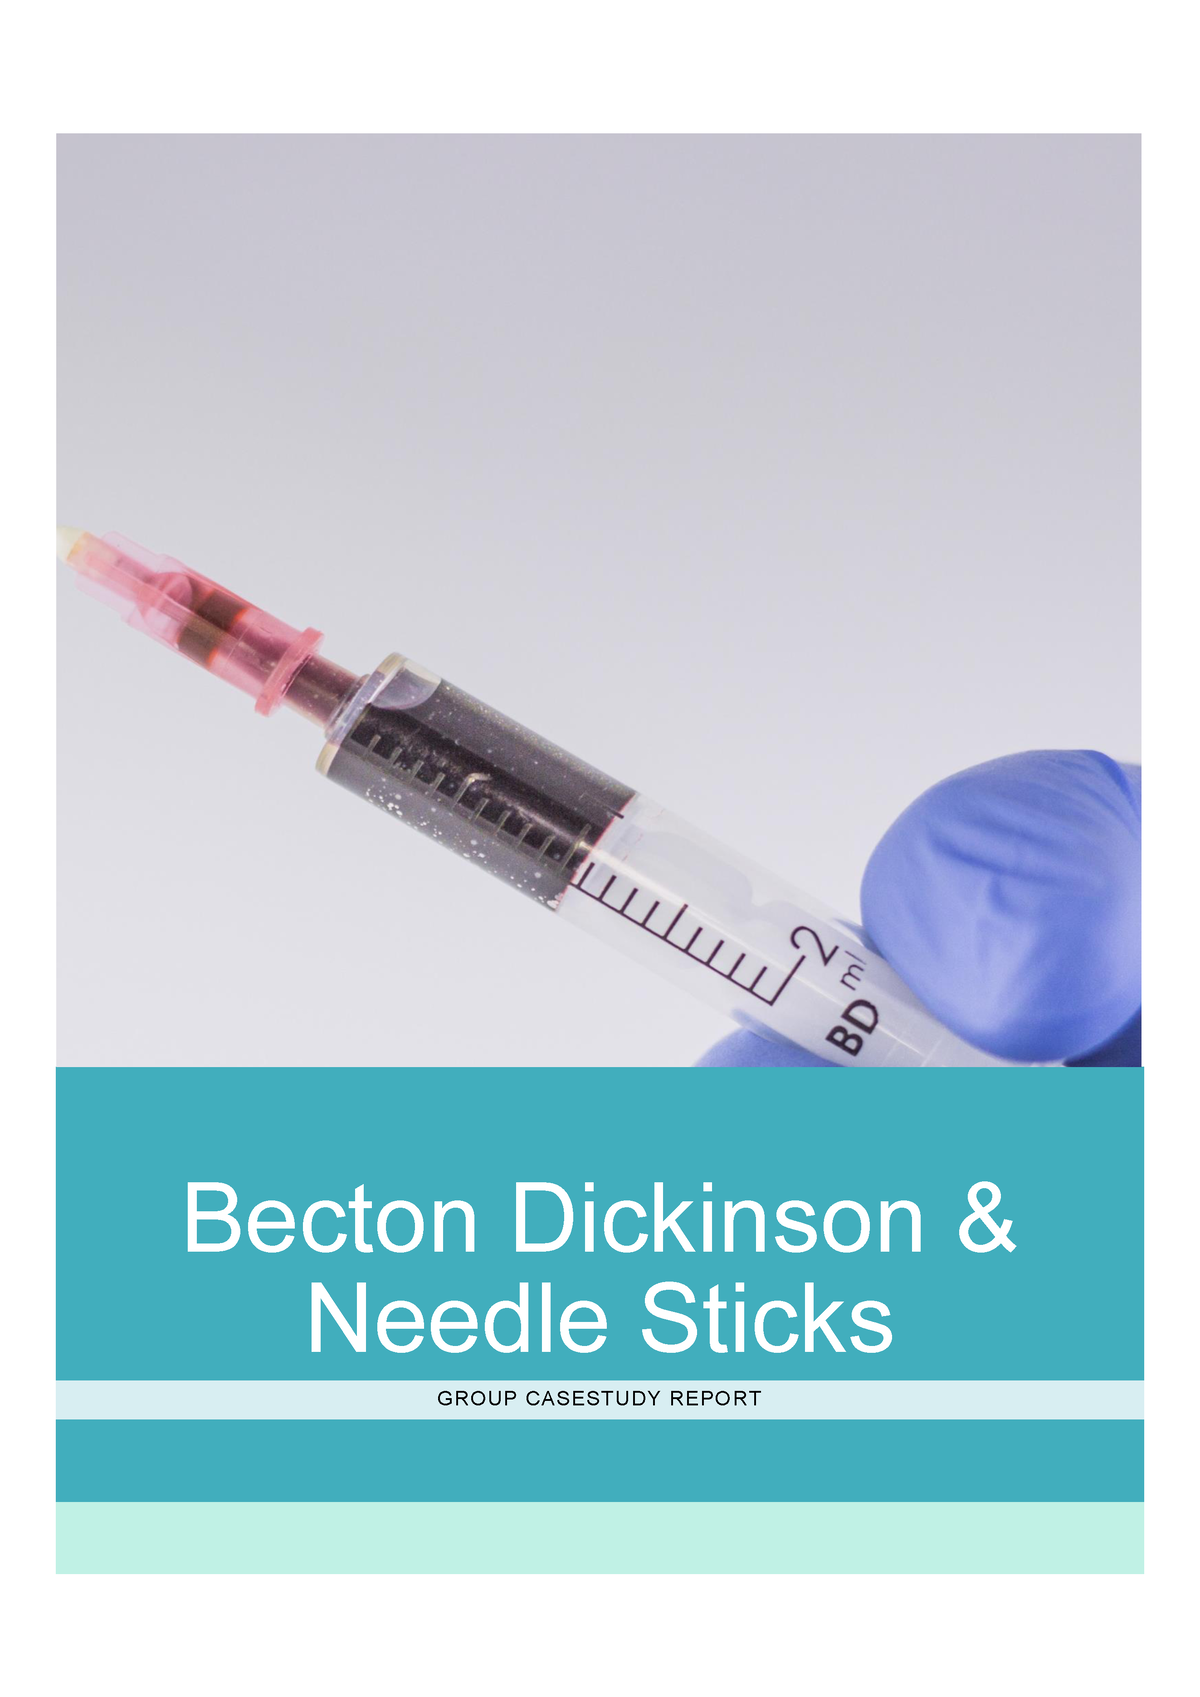 becton dickinson and needle sticks